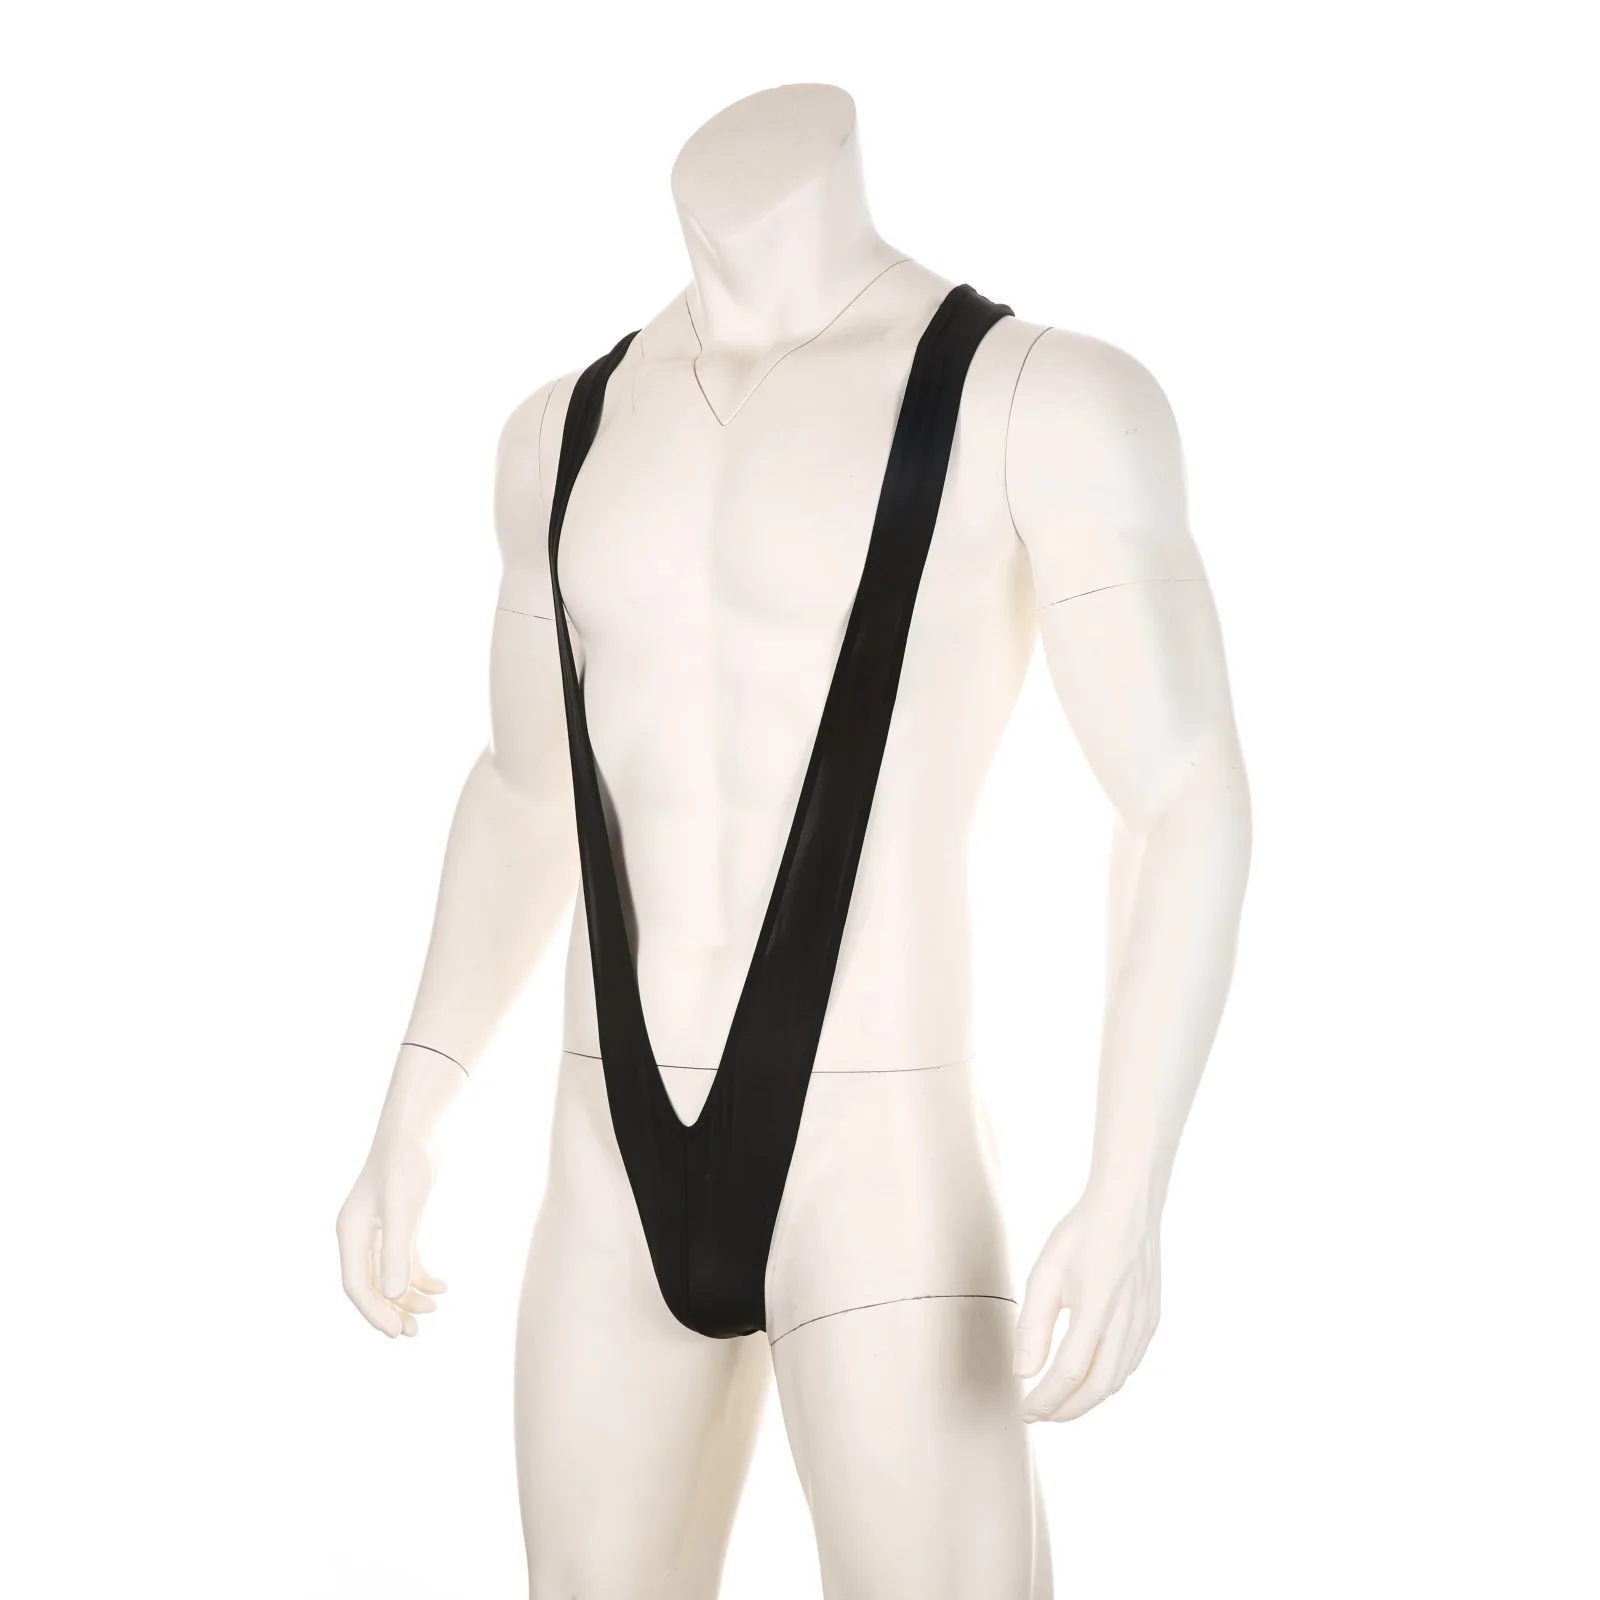 

CLEVER-MENMODE Men's Bodysuit Sexy Strap Underwear Male Thong Mankini Leotard Thongs Body Costume Stage Perform Bondage Lingerie